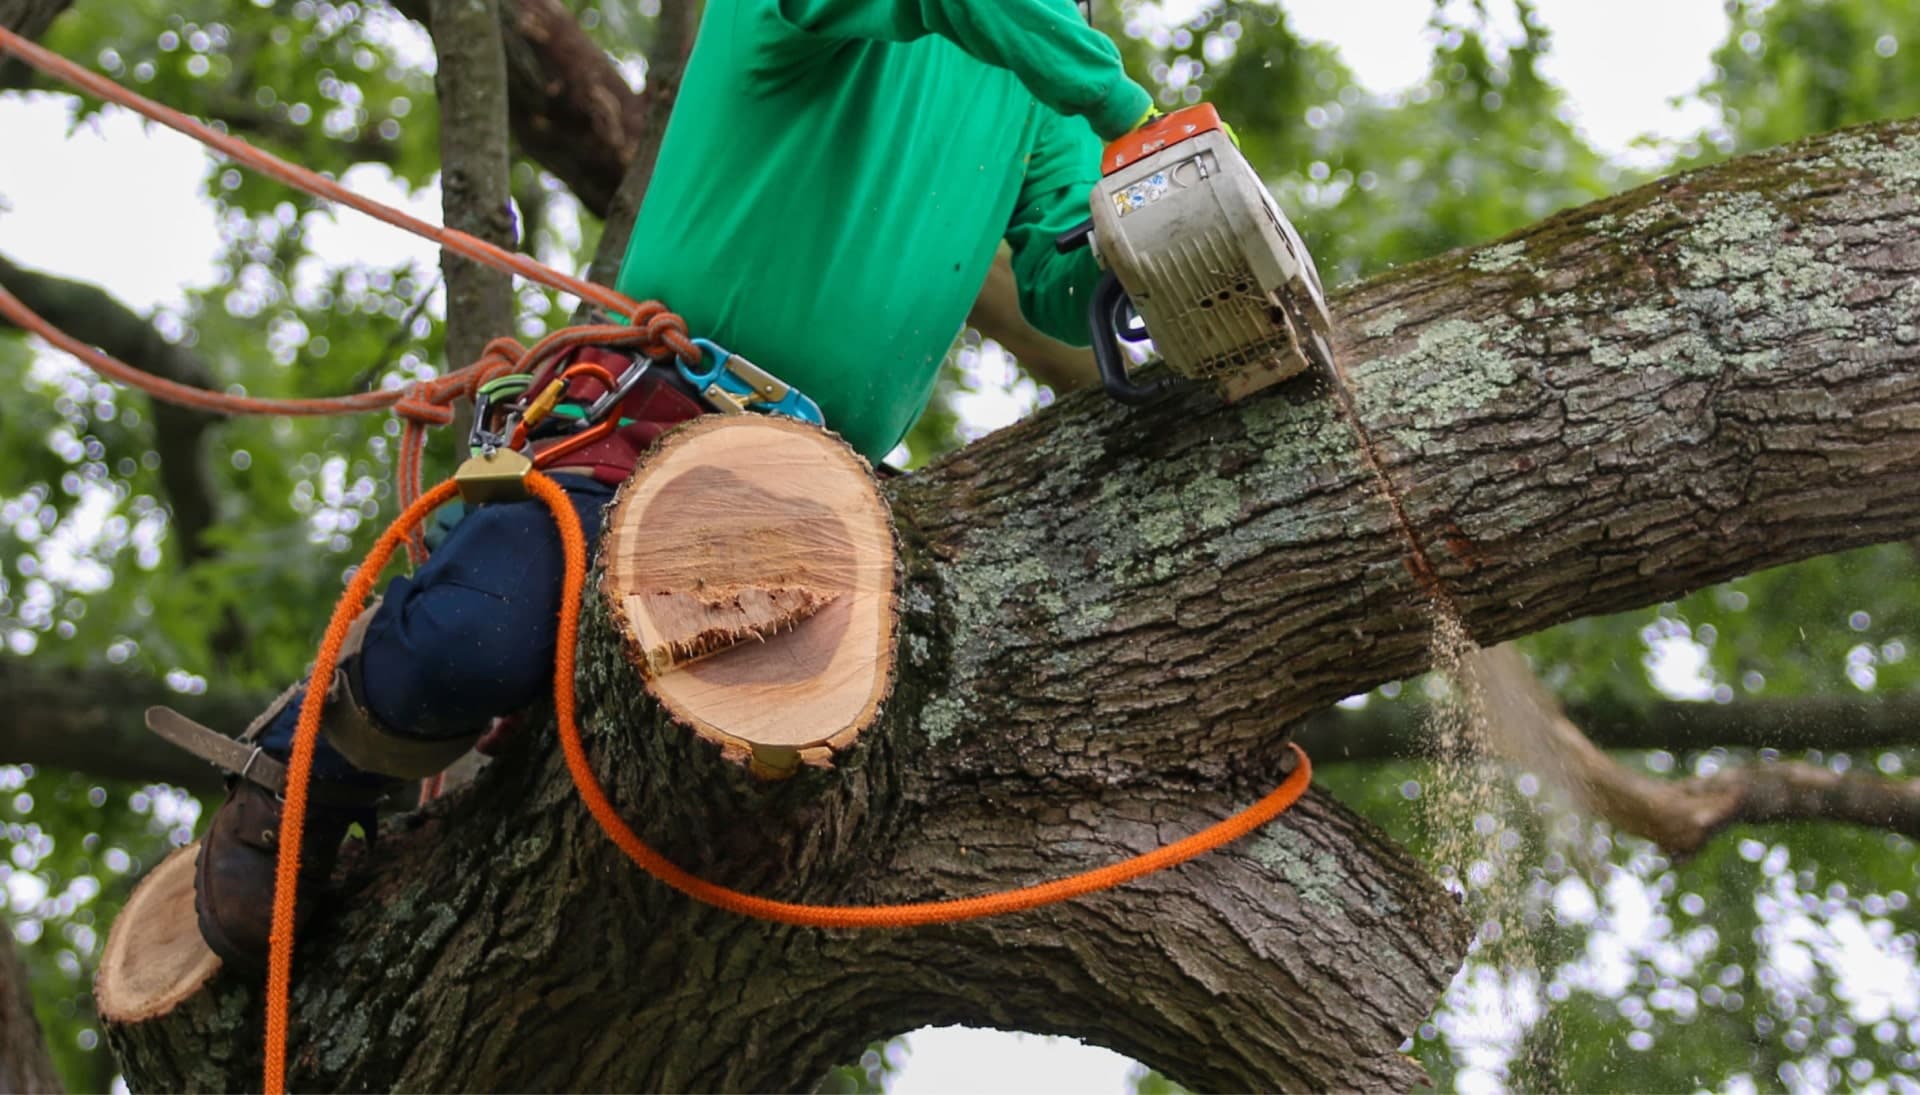 Shed your worries away with best tree removal in Columbia